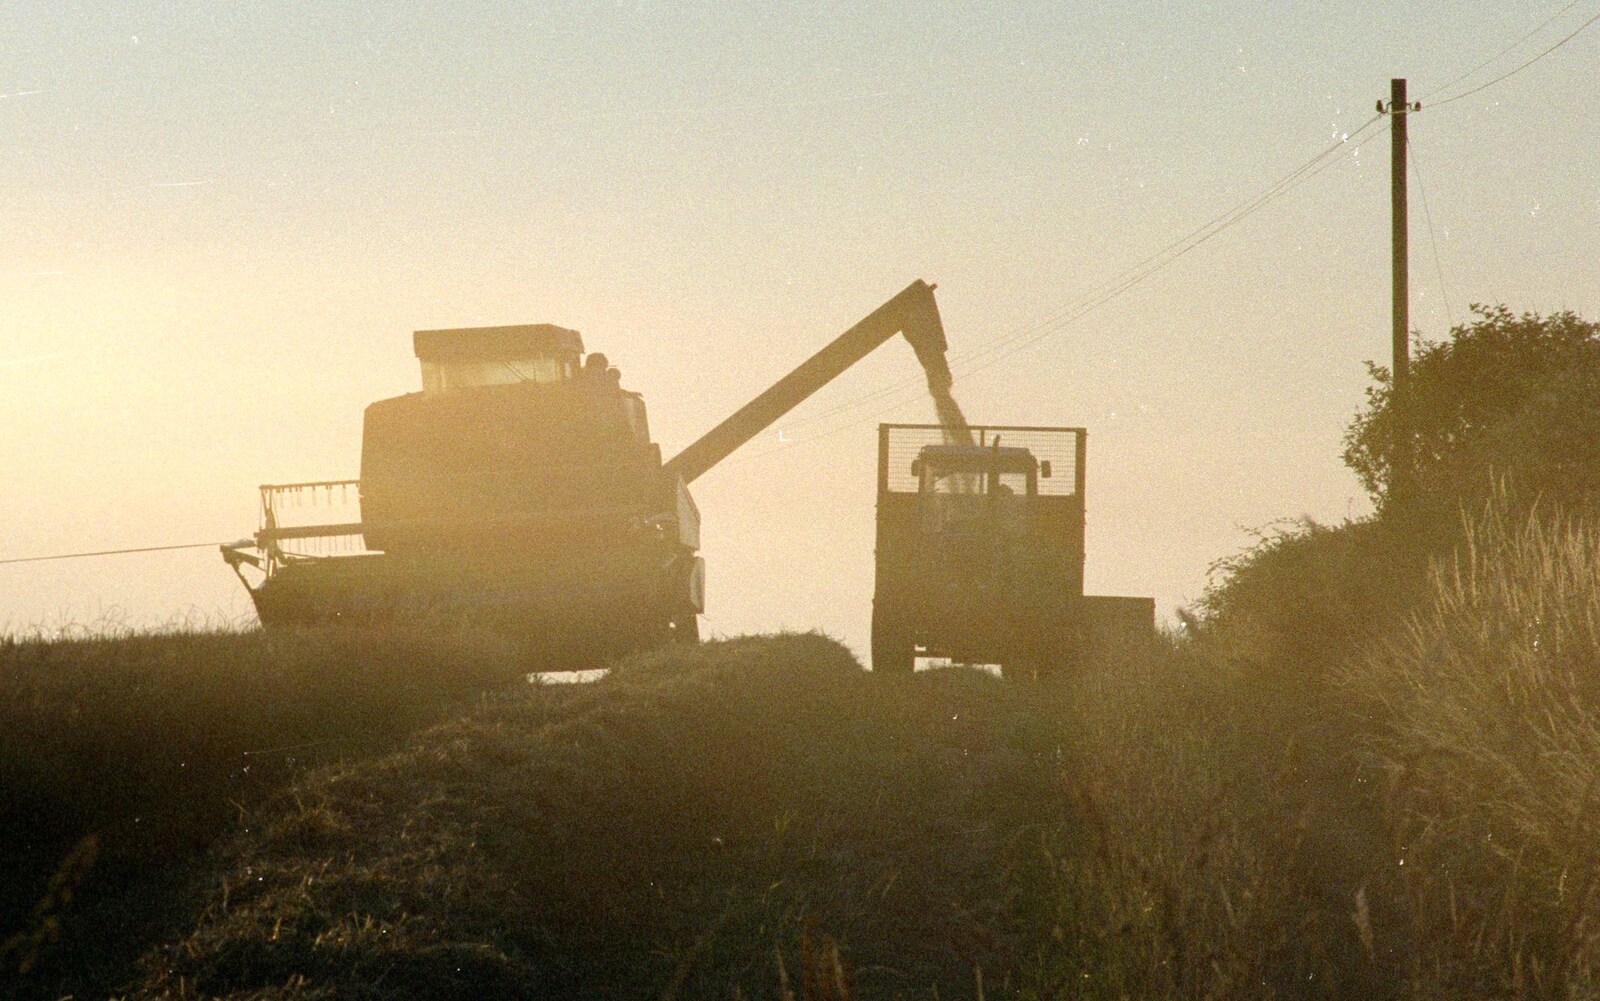 A Combine harvester rumbles around from Summer Days on Pitt Farm, Harbertonford, Devon - 17th July 1989